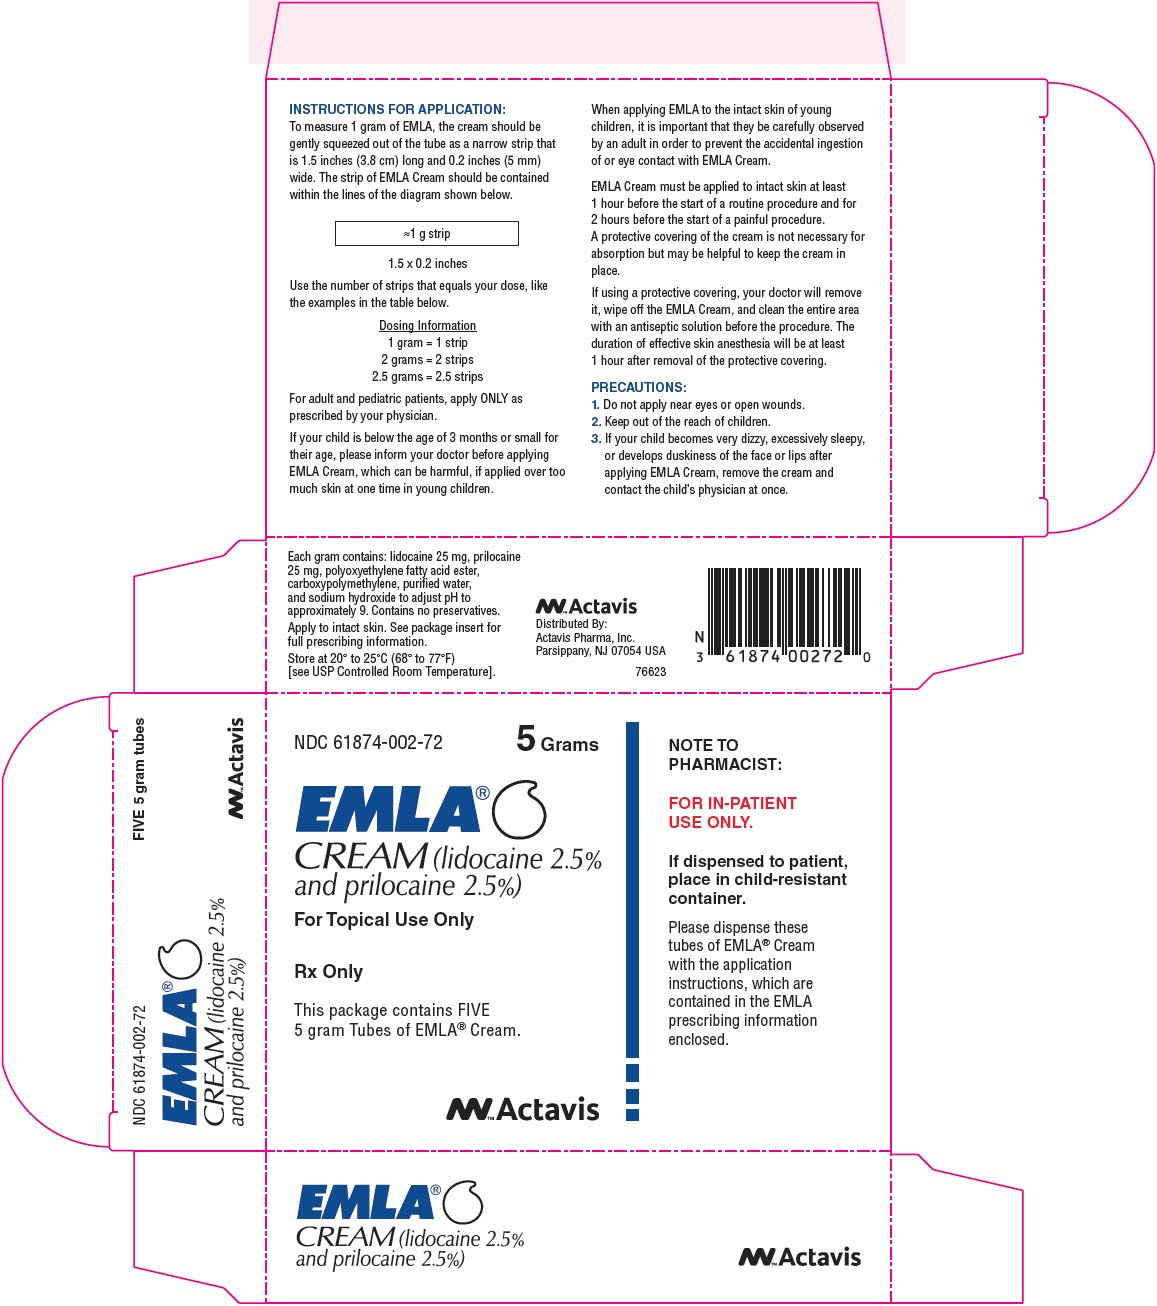 NDC 61874-002-72 5 Grams EMLA® CREAM (lidocaine 2.5% and prilocaine 2.5%) For Topical Use Only Rx only